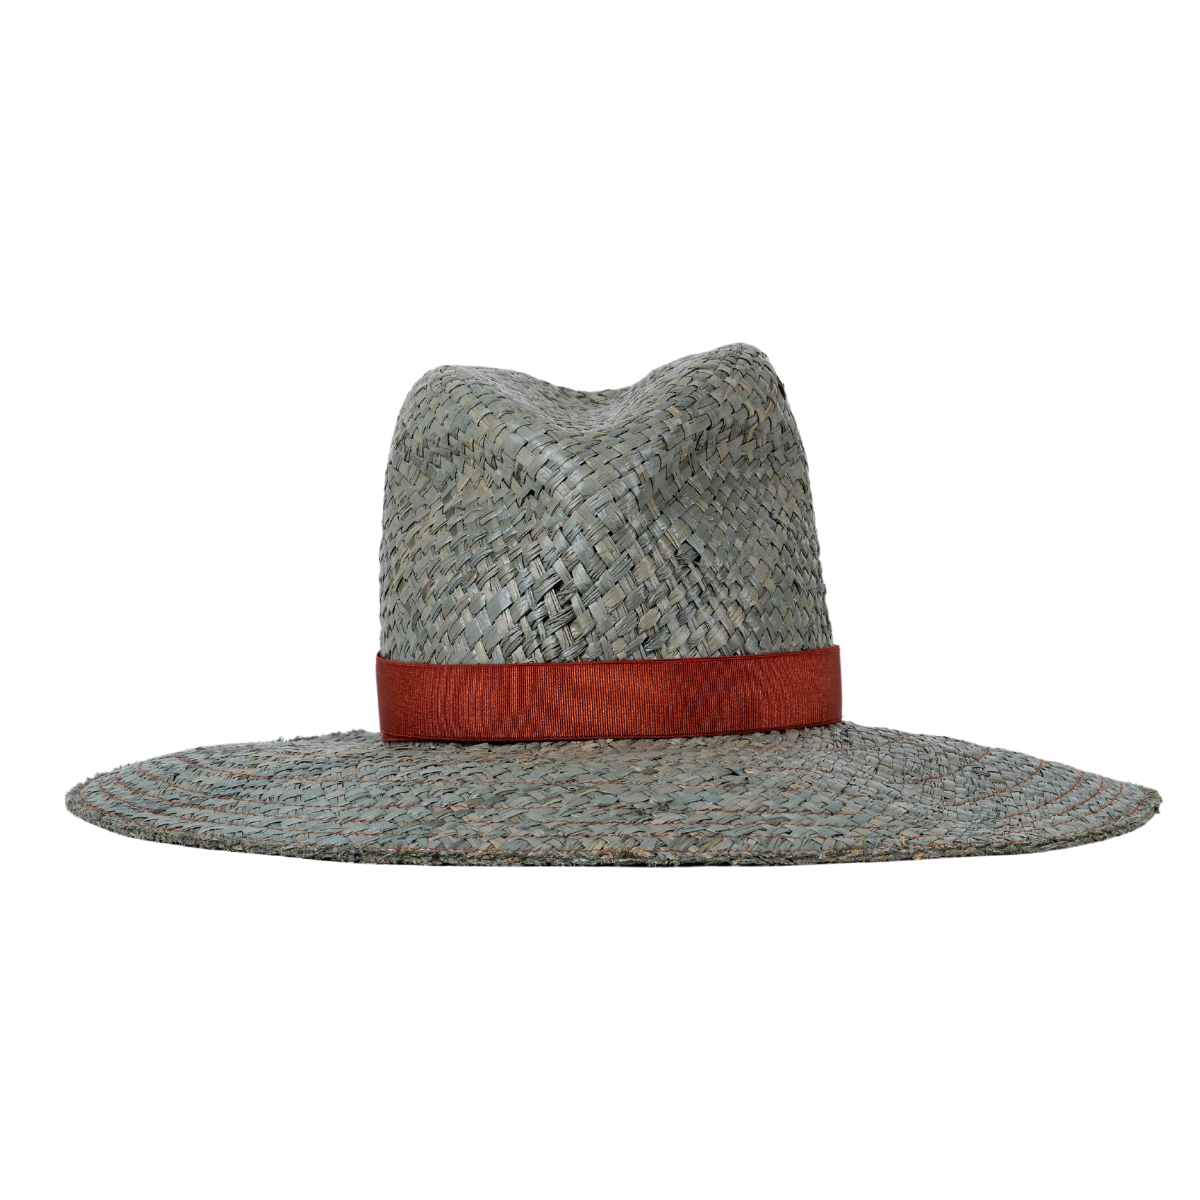 Lola Hat - Snap First Aid (Sage/Rust)